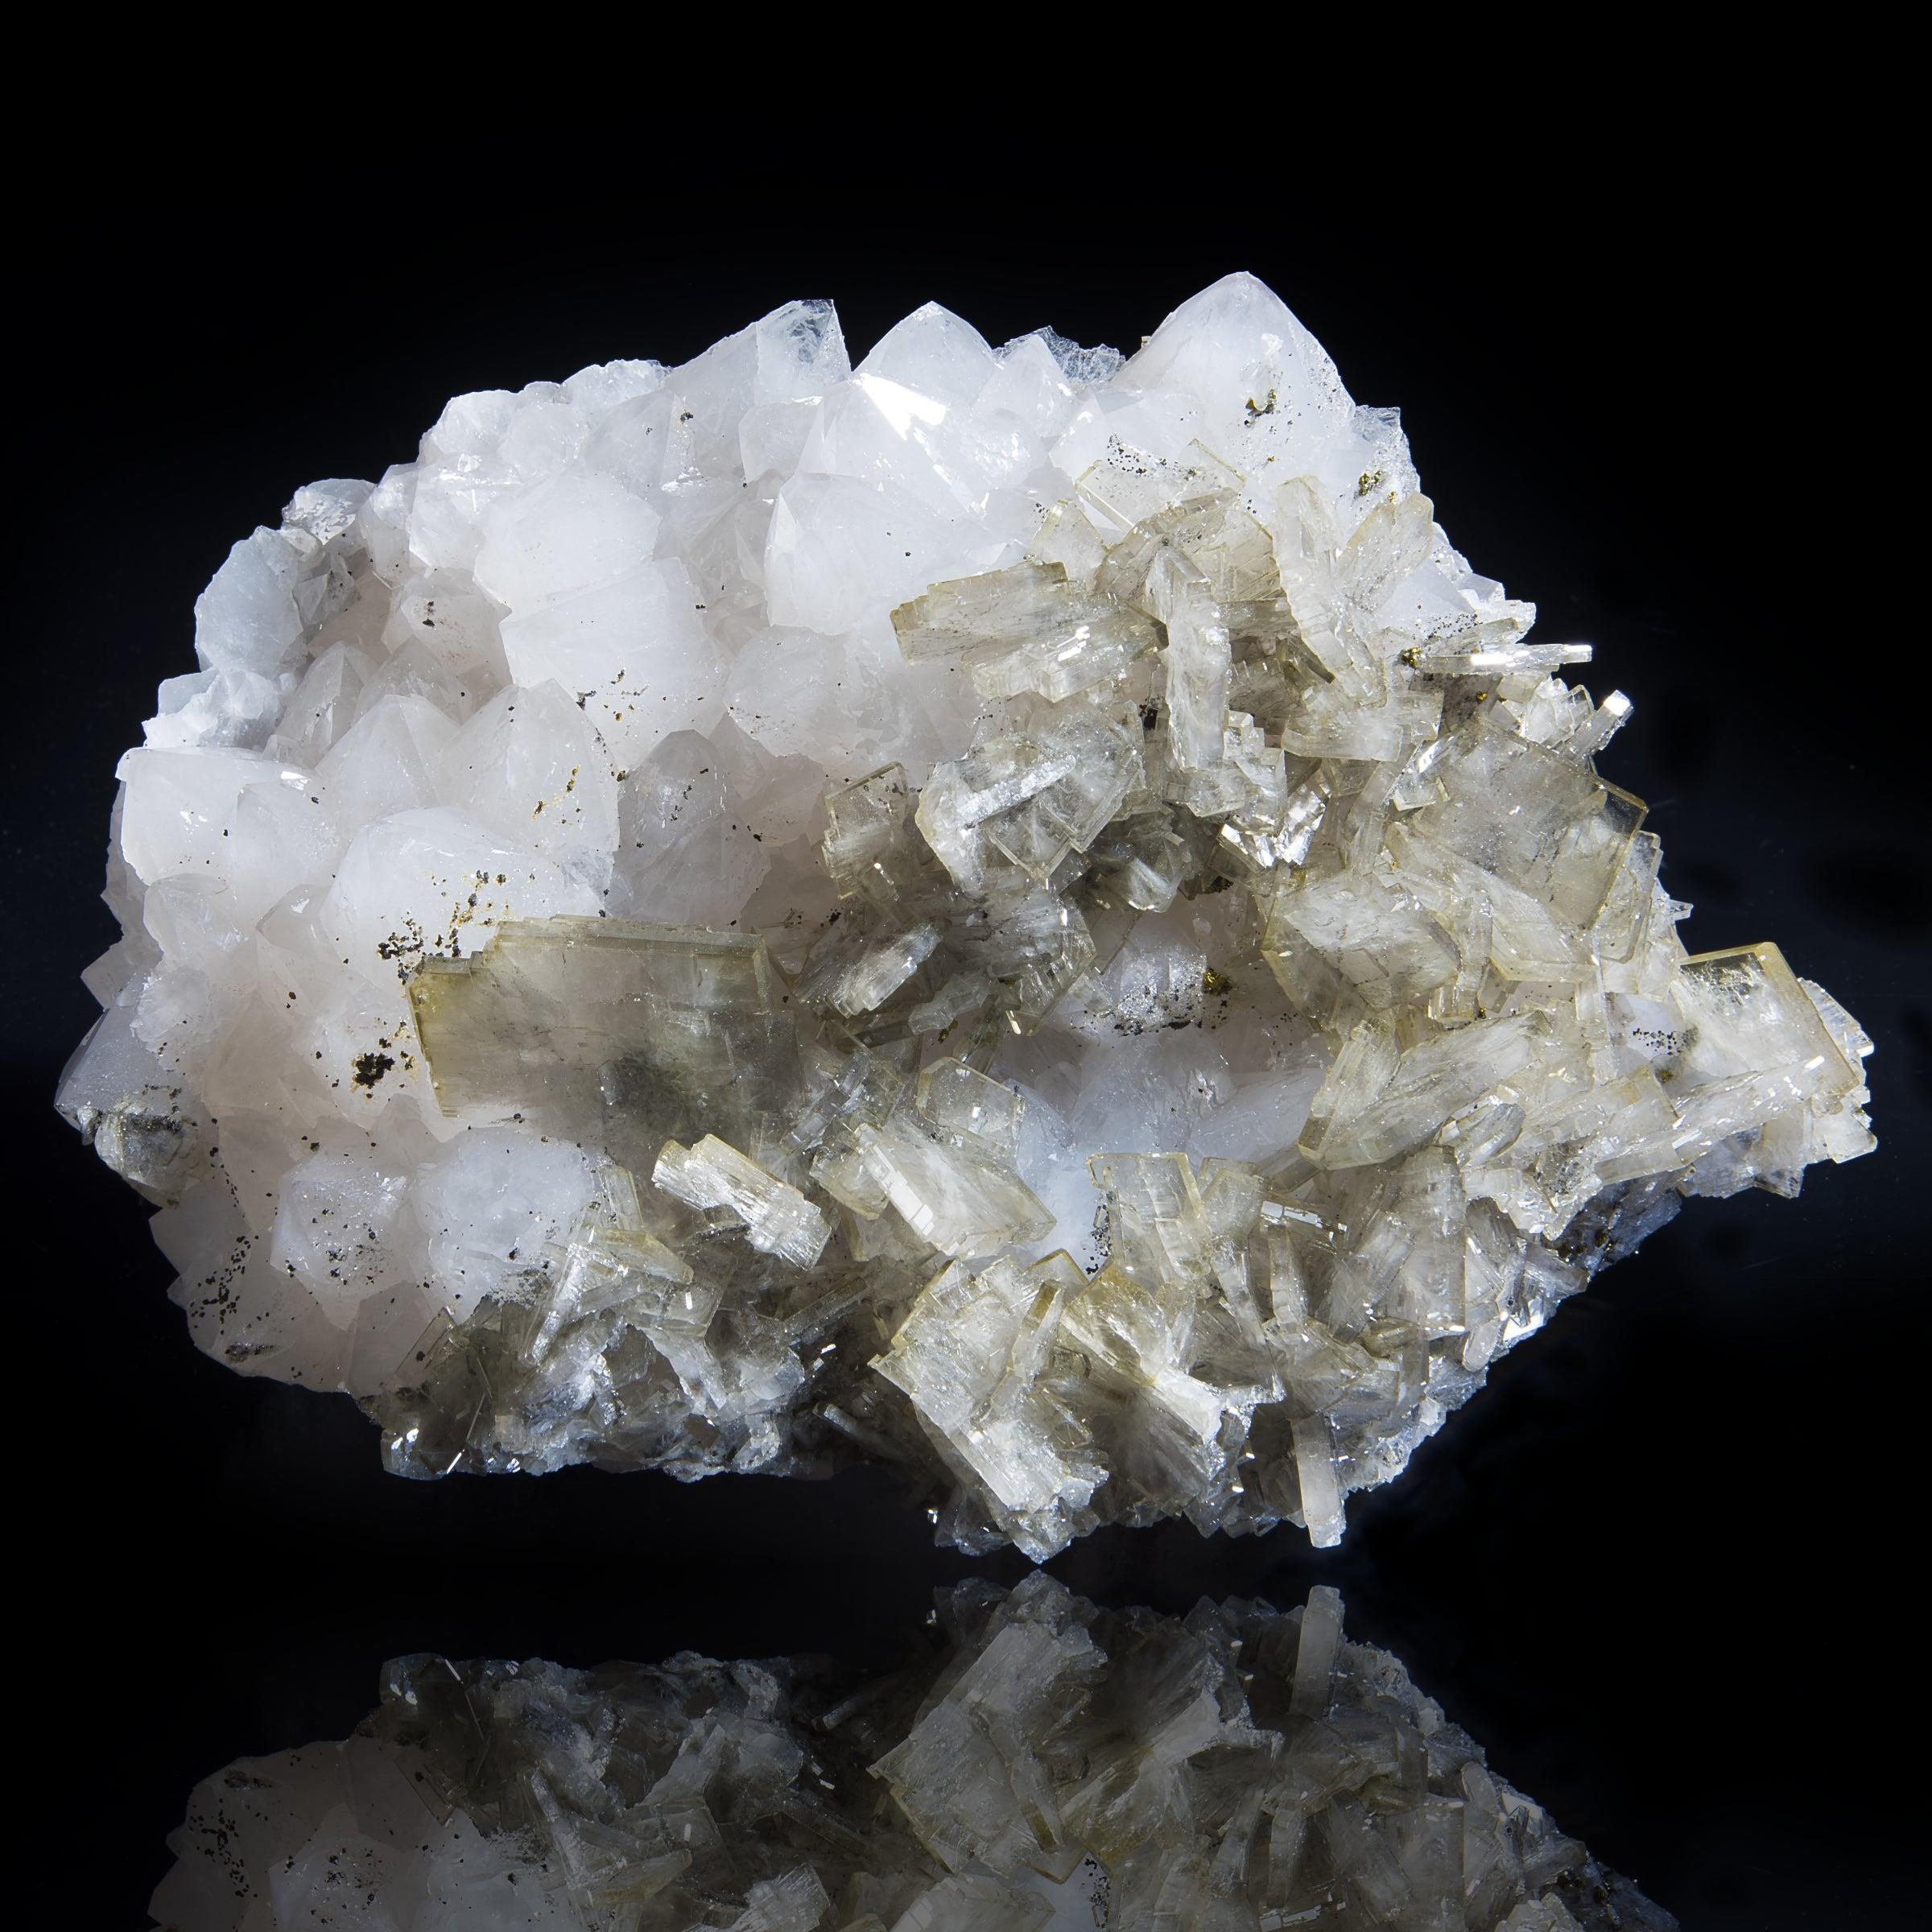 Cerro Warihuyn, Miraflores Peru

Barite is well-known for its great range of colors and varied crystal forms and habits. This specimen has a golden grey hue. Its luster is incredible and all the crystals are intact. It comes from Cerro Warihuyn,